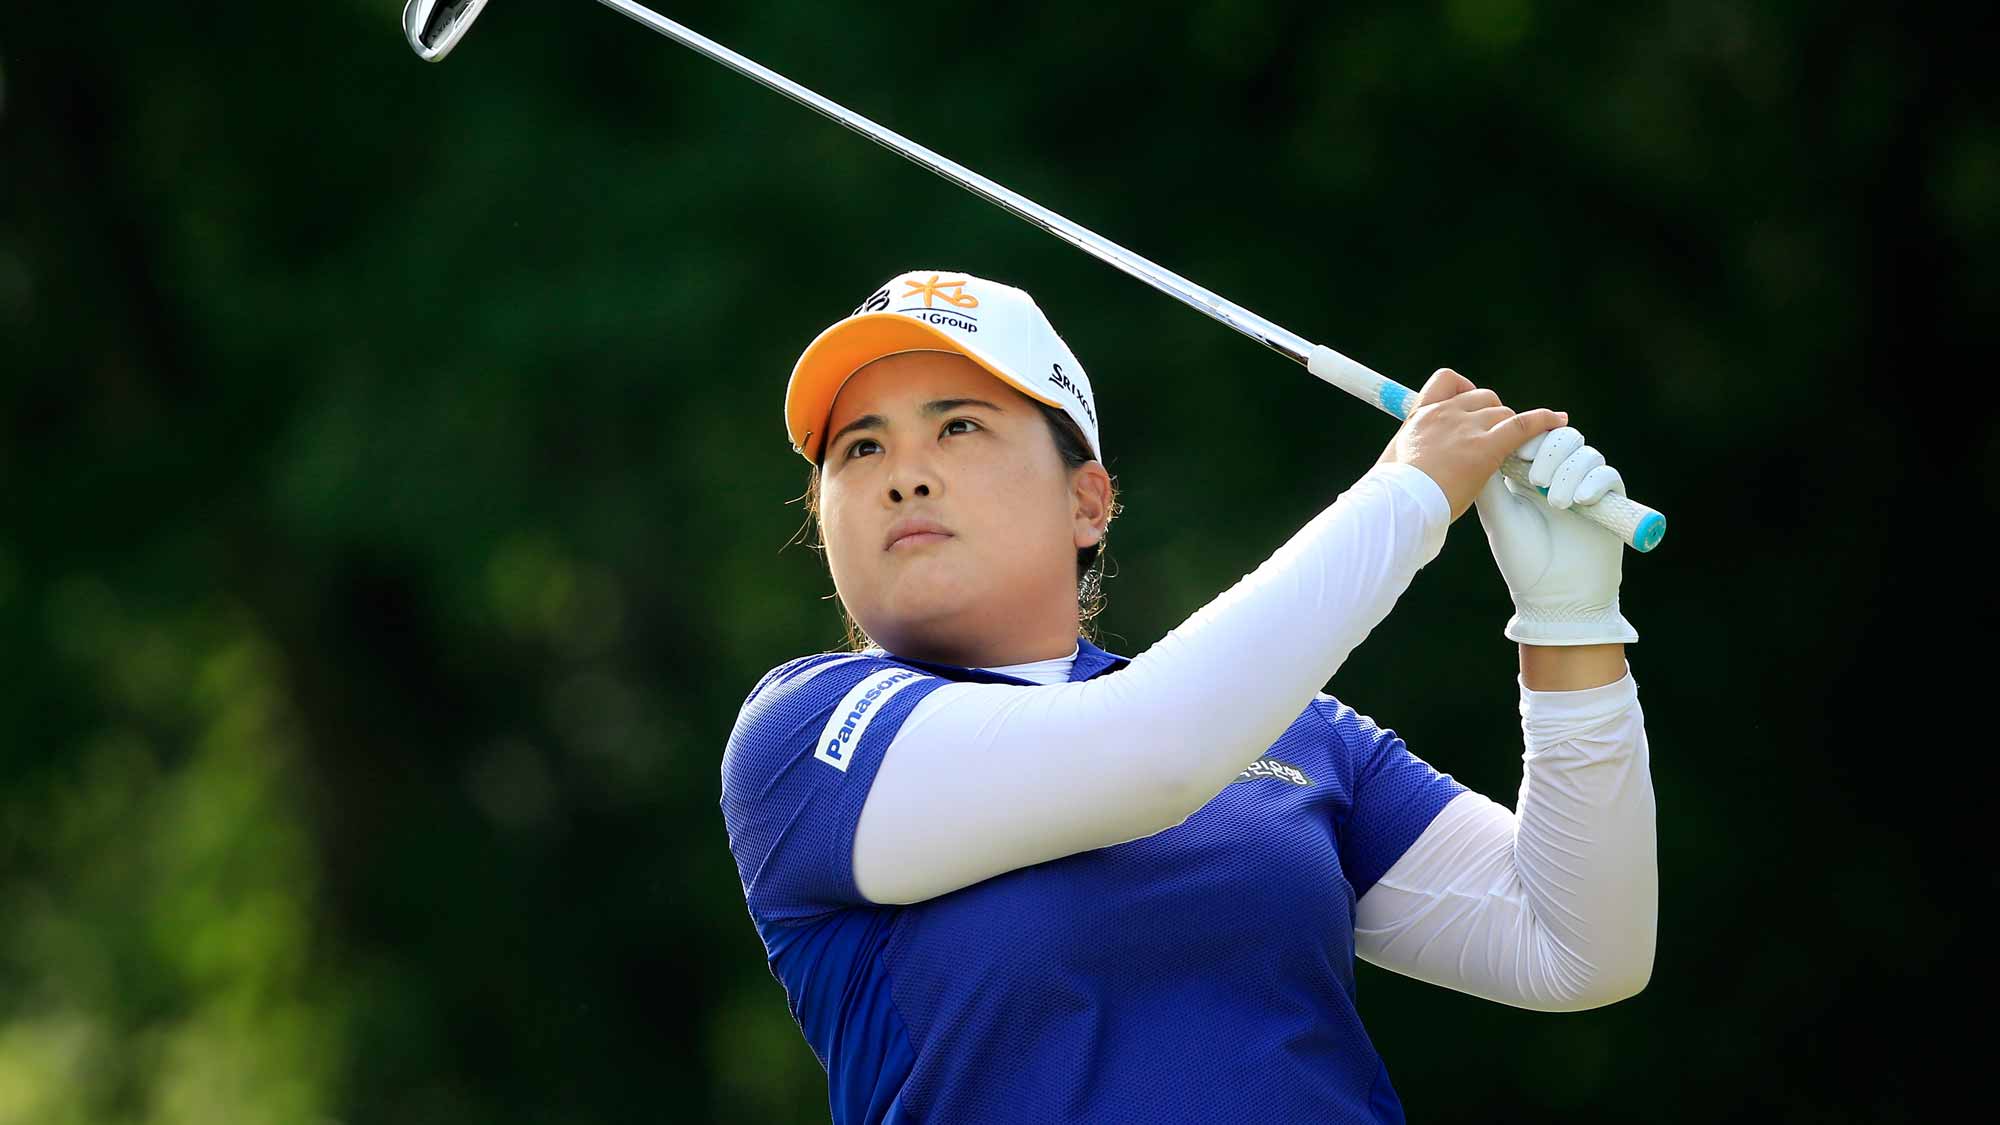 Inbee Park of South Korea plays a shot on the third hole during the first round of the Walmart NW Arkansas Championship Presented by P&G at Pinnacle Country Club